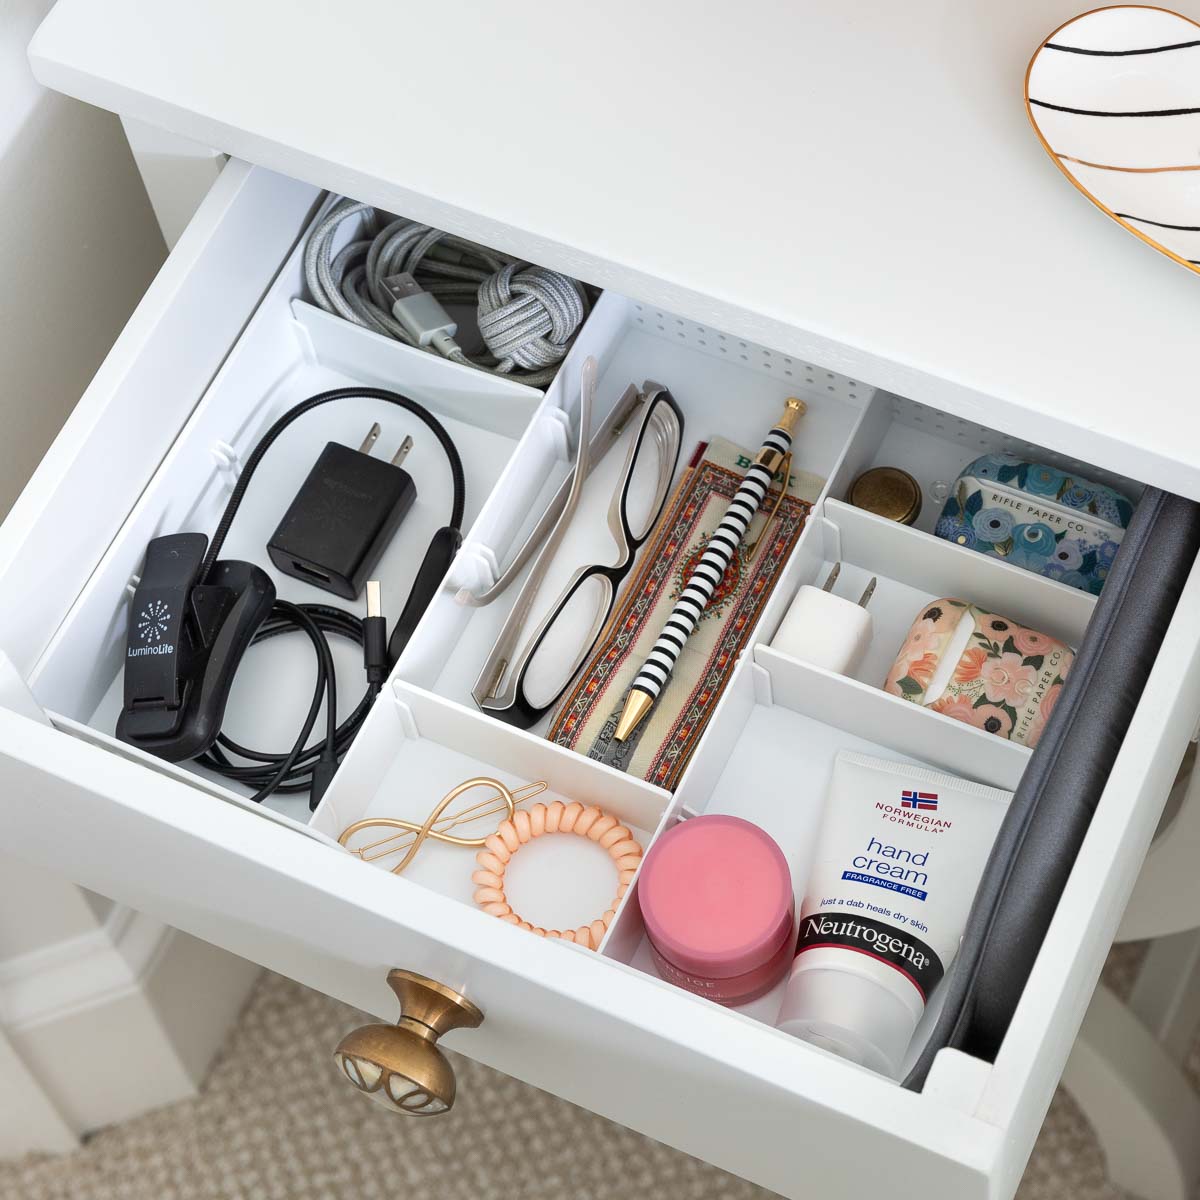 15 Bedroom Organization Ideas to Help Kick the Clutter! - Driven by Decor